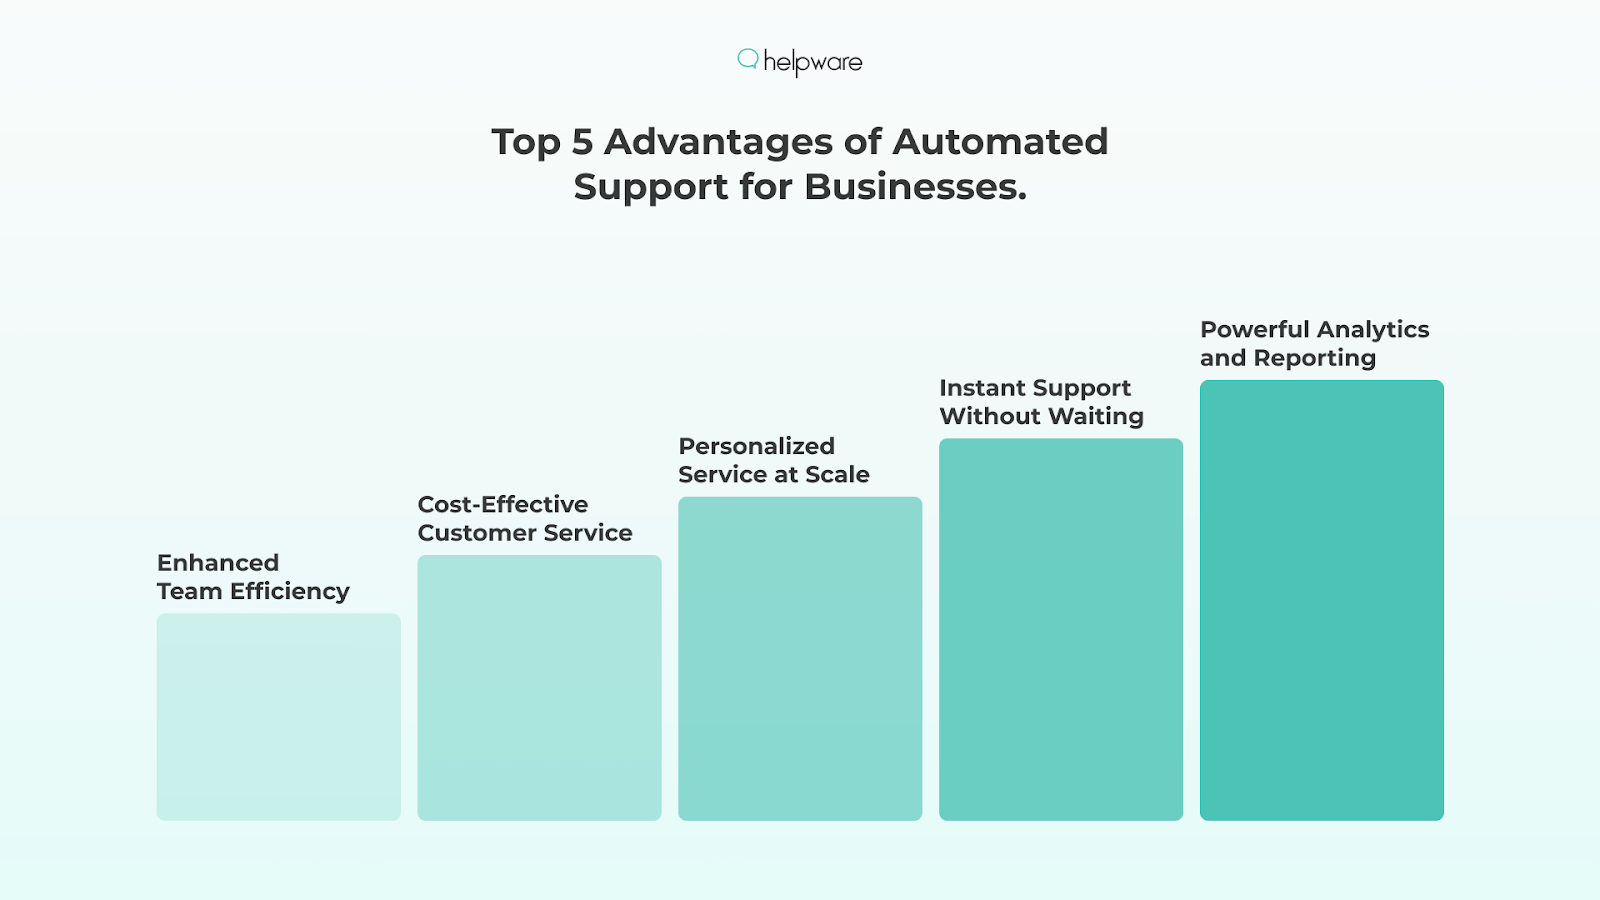 Top 5 Advantages of Automated Customer Support for Businesses.